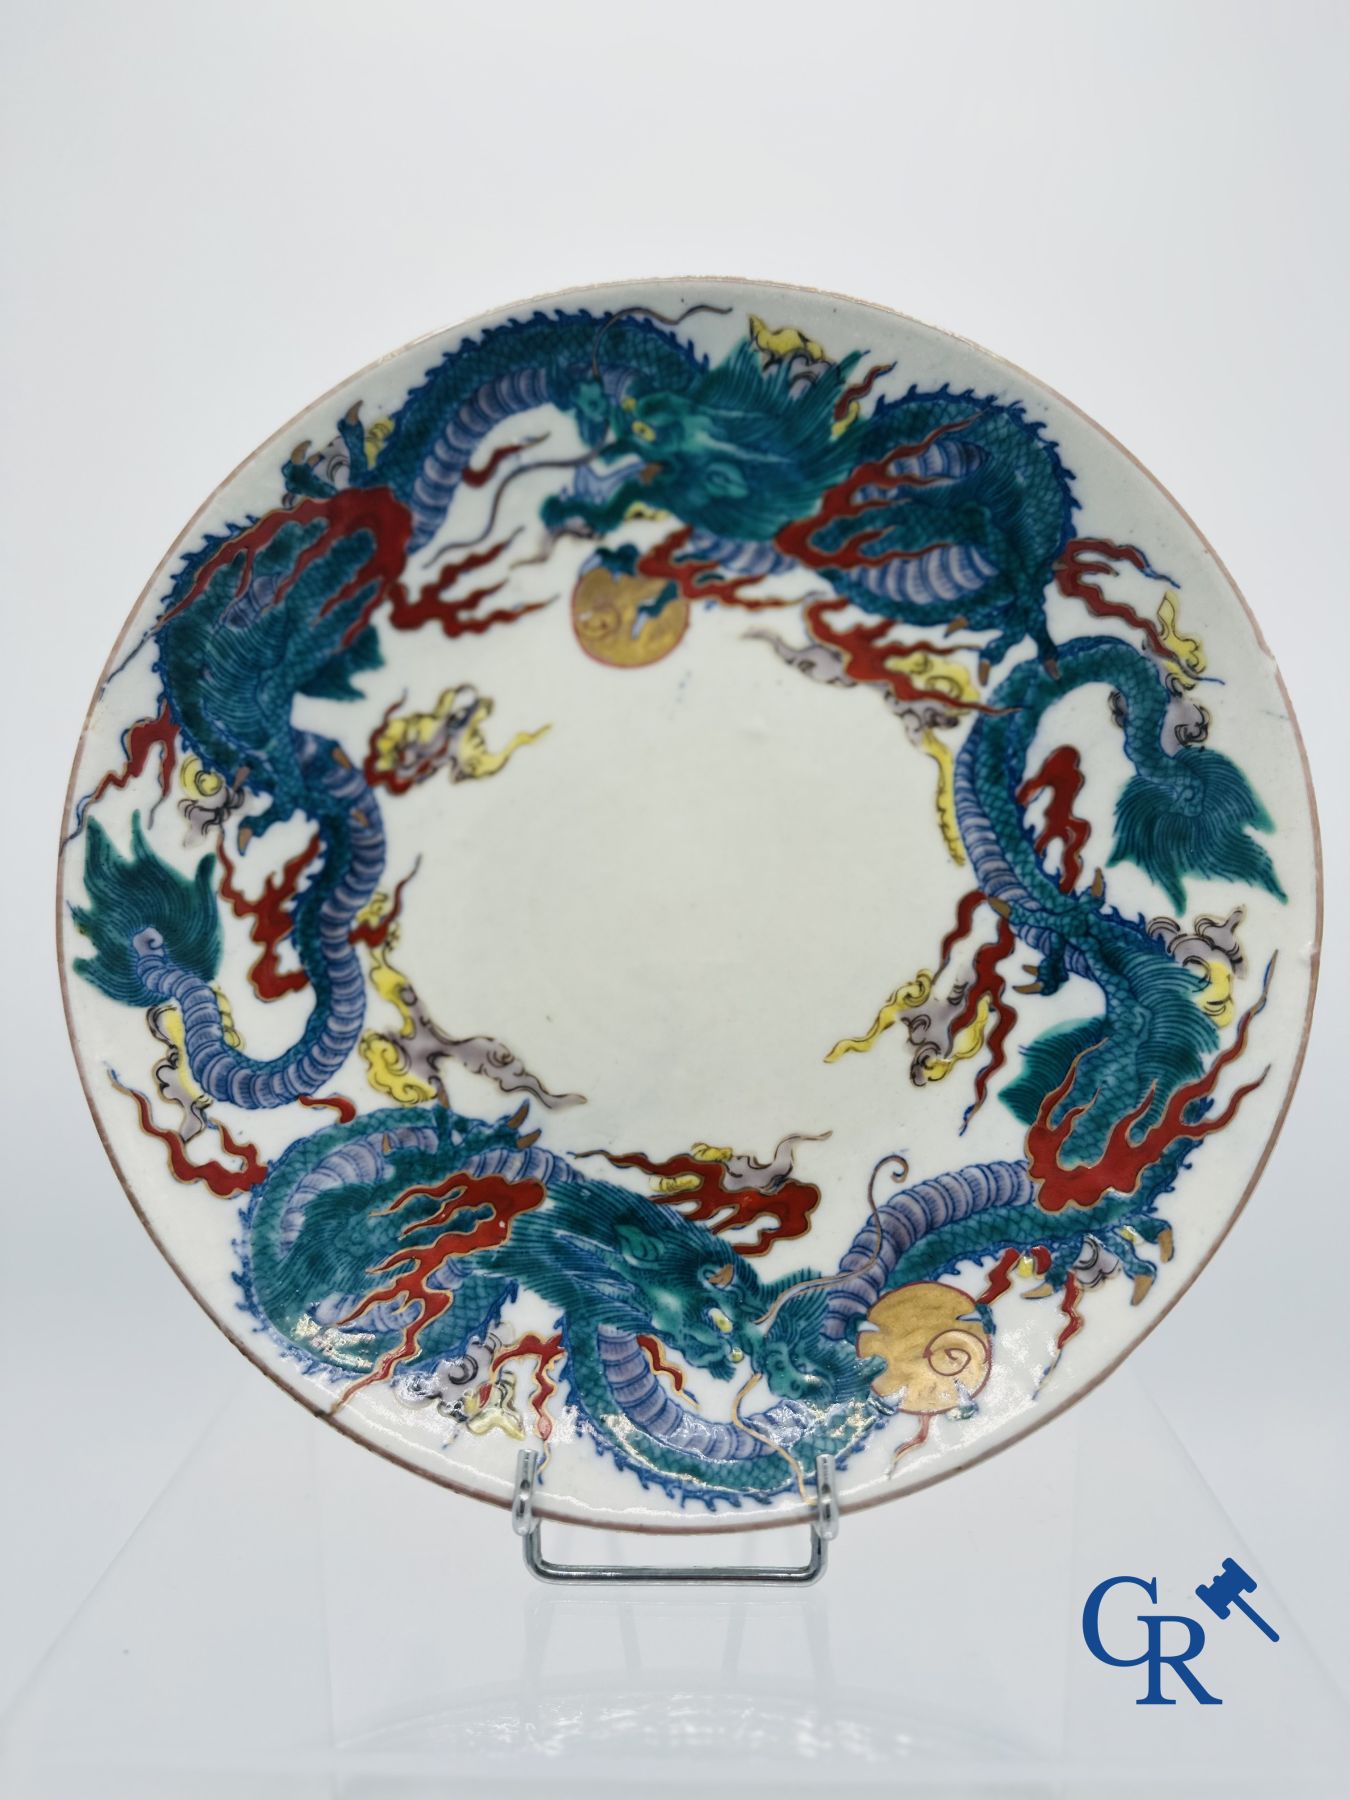 Chinese Porcelain: Lot of 6 different pieces of Chinese porcelain. 18th and 19th century. - Image 5 of 11